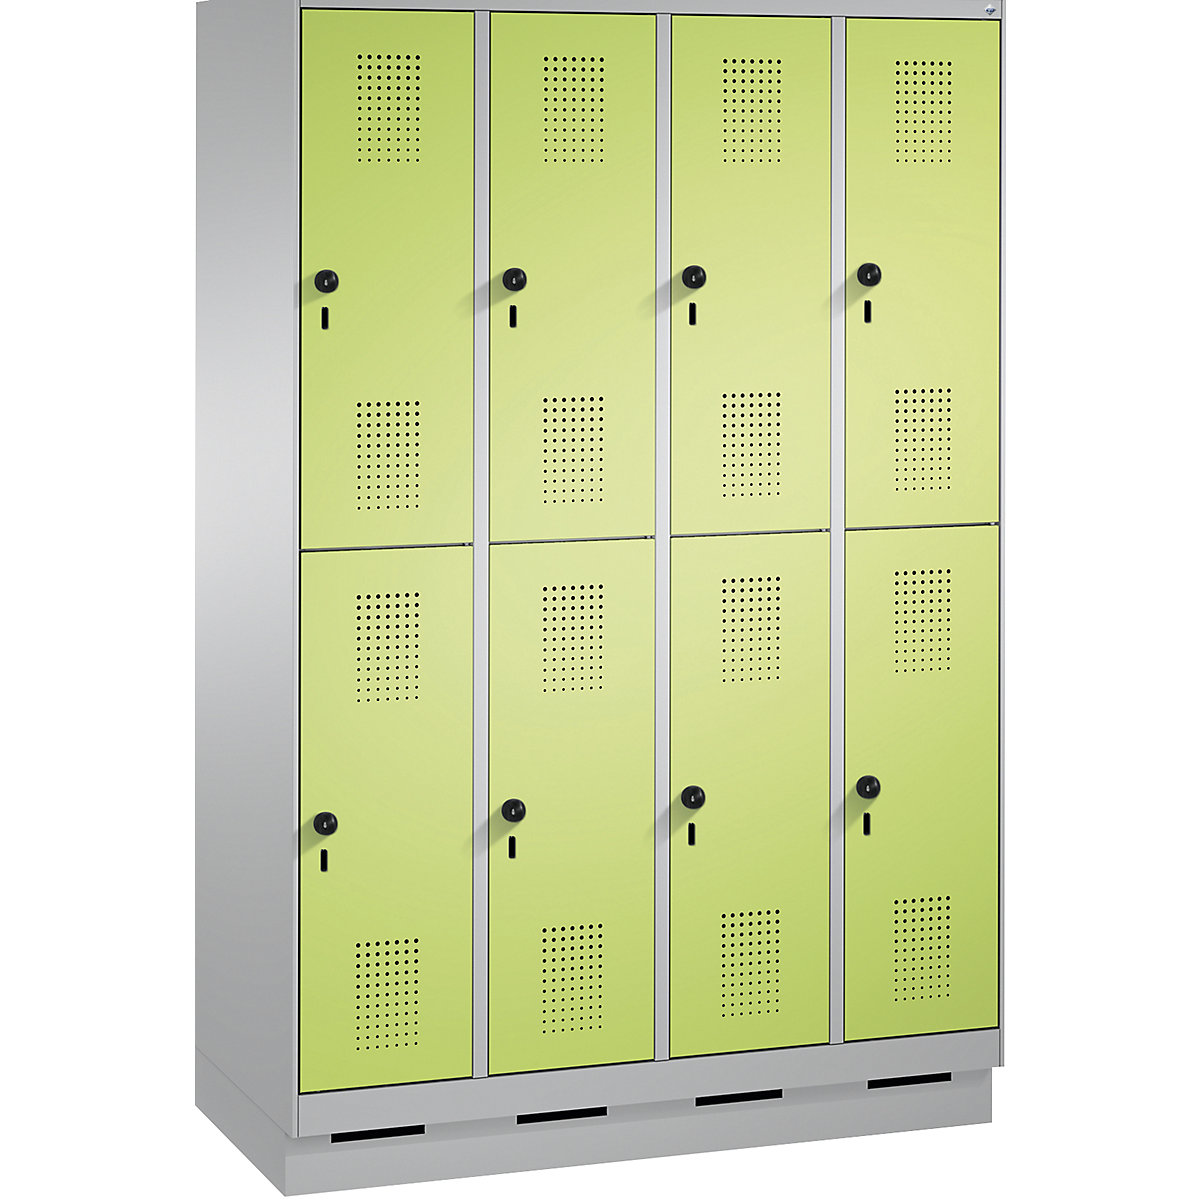 EVOLO cloakroom locker, double tier, with plinth – C+P, 4 compartments, 2 shelf compartments each, compartment width 300 mm, white aluminium / viridian green-13